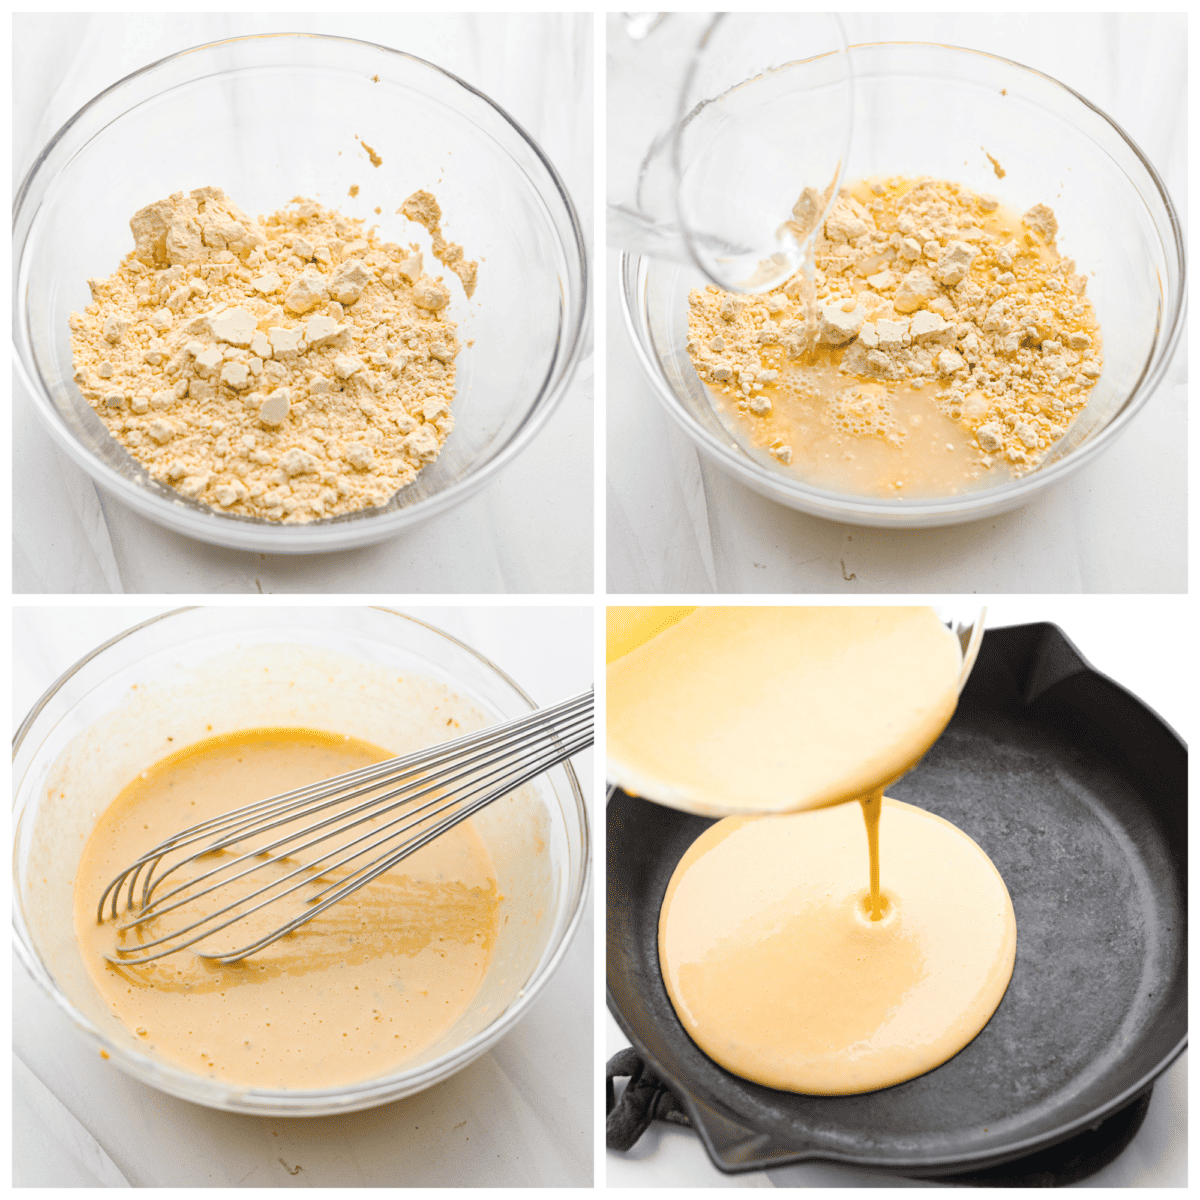 First photo of chickpea flour in a bowl. Second photo of water pouring into the bowl of chickpea flour. Third photo of the batter whisking. Fourth photo of the batter pouring in the skillet.